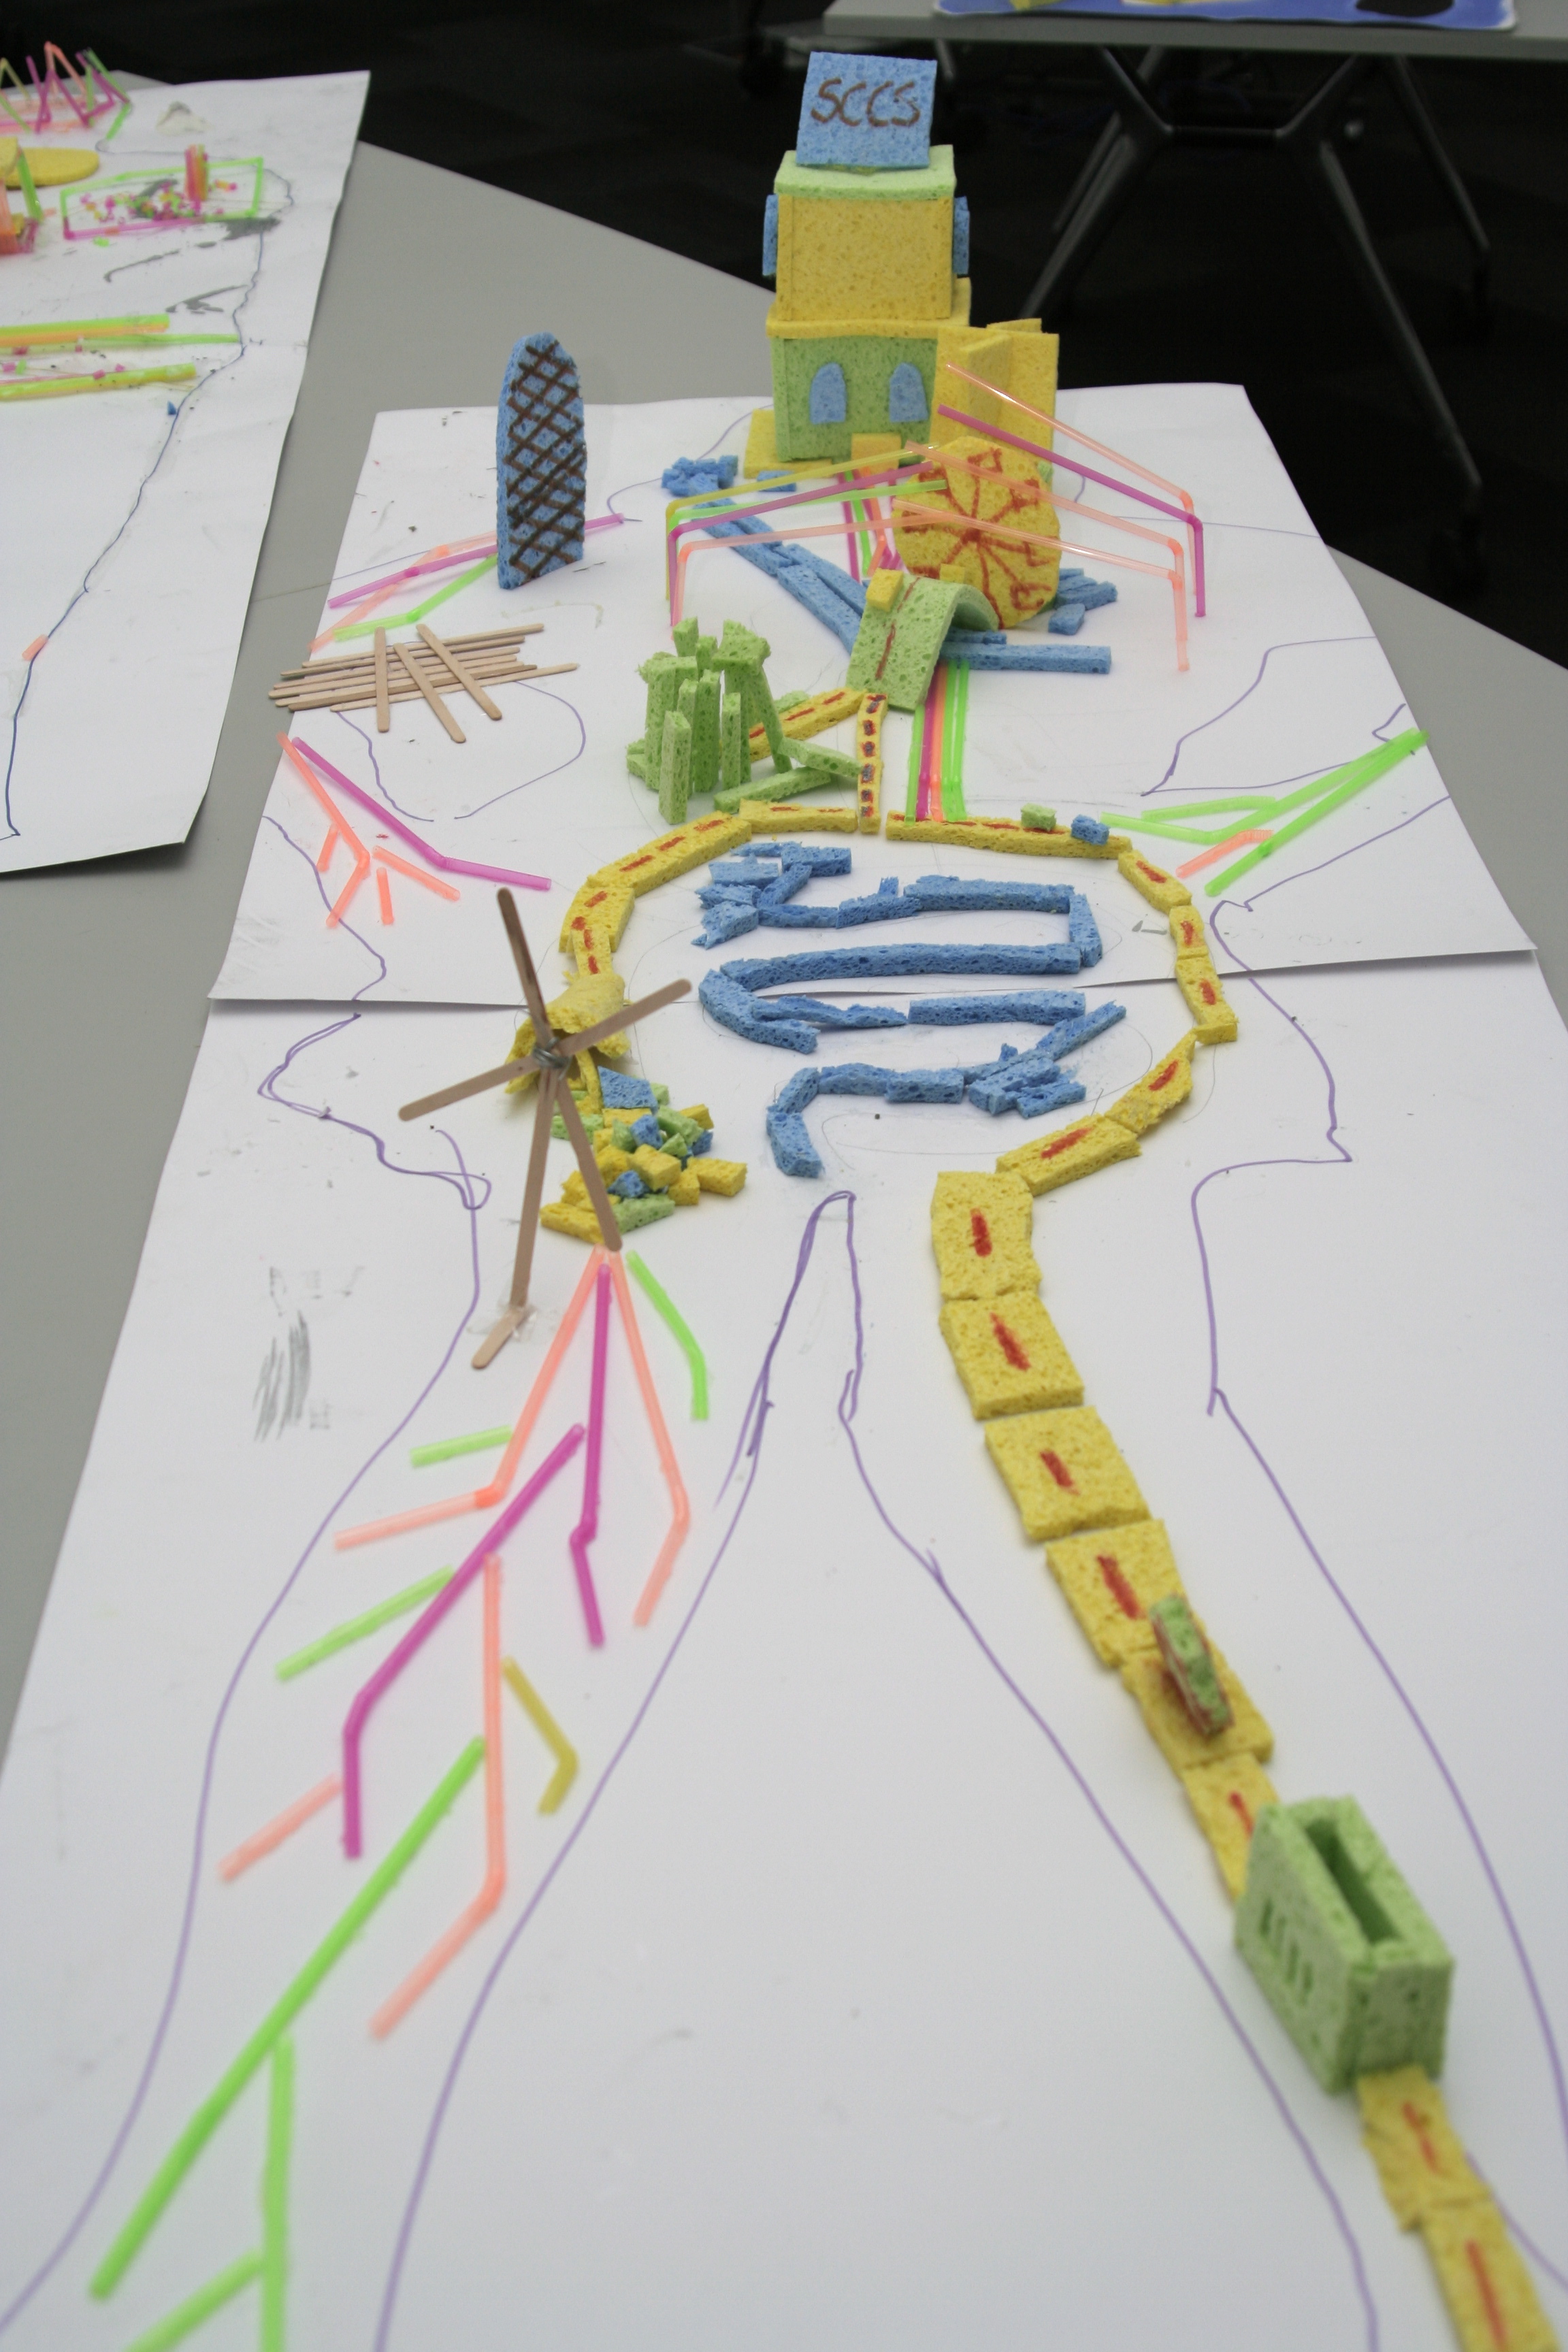 A body-map created by Camden Community School students at the Hunterian Museum.